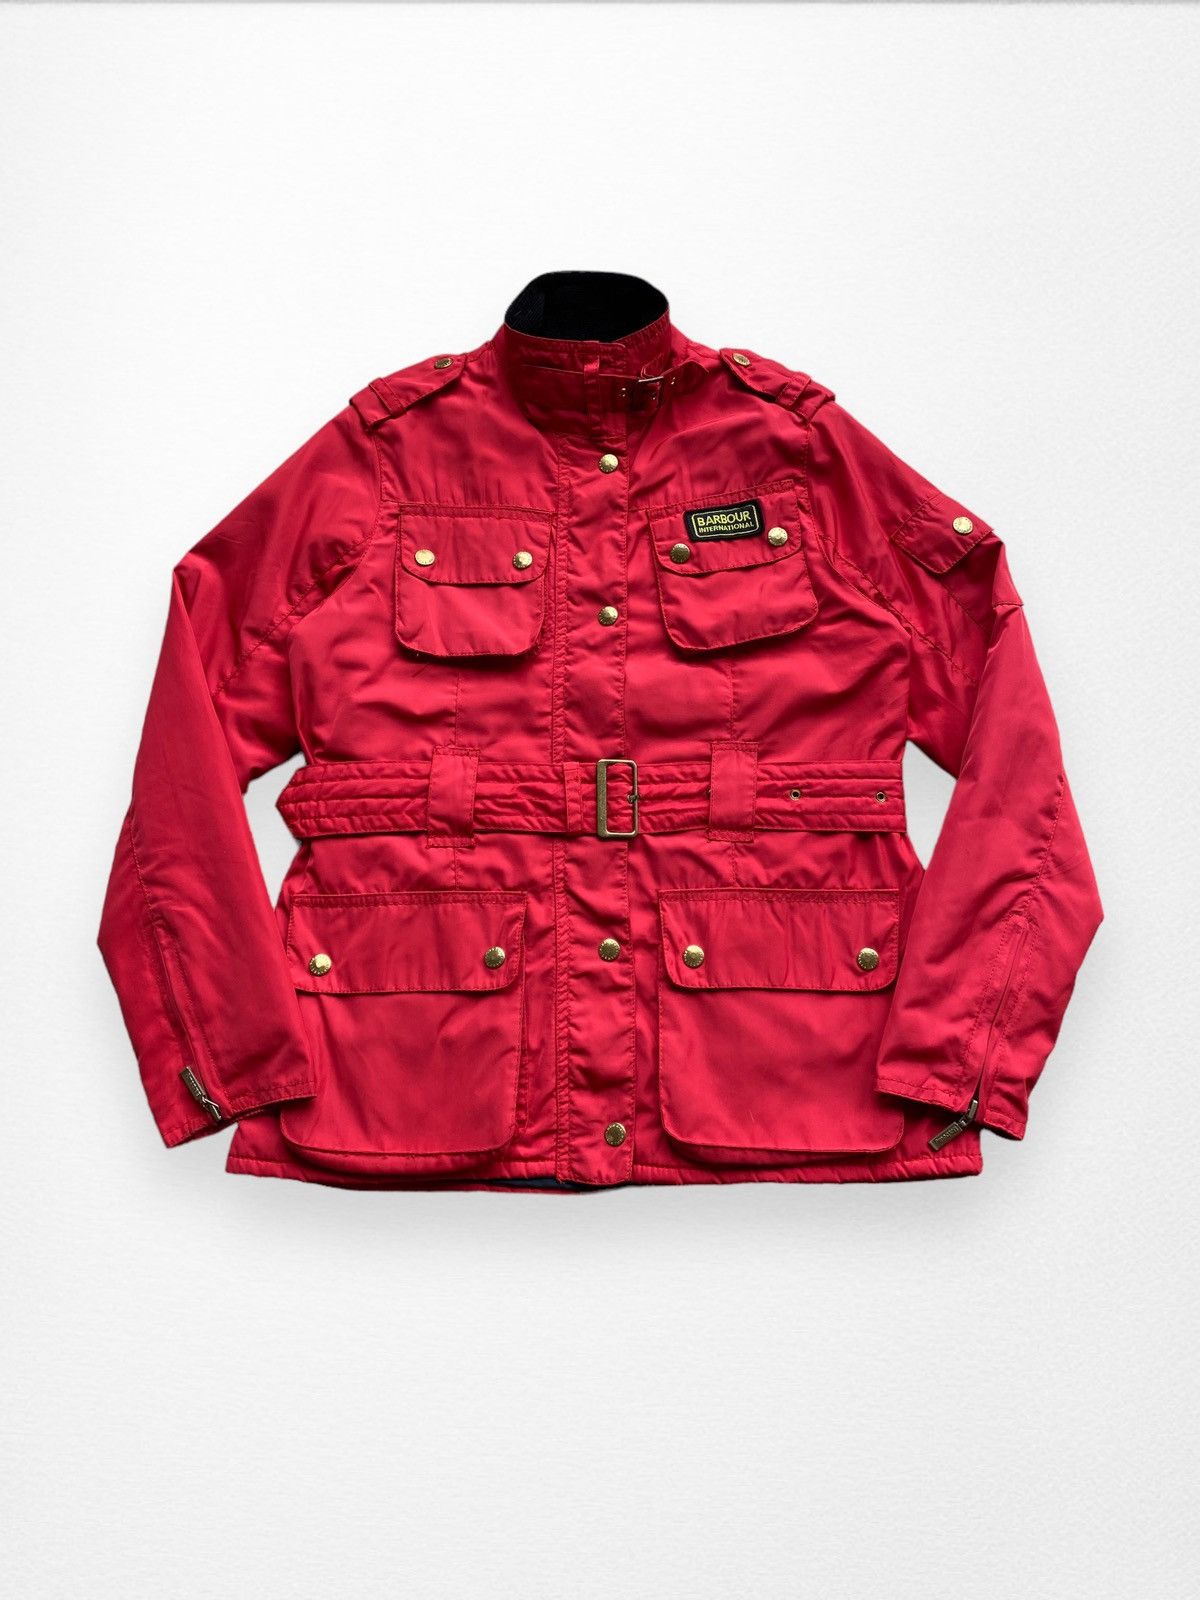 Barbour Barbour Rainbow International Gold W’s Jacket | Grailed